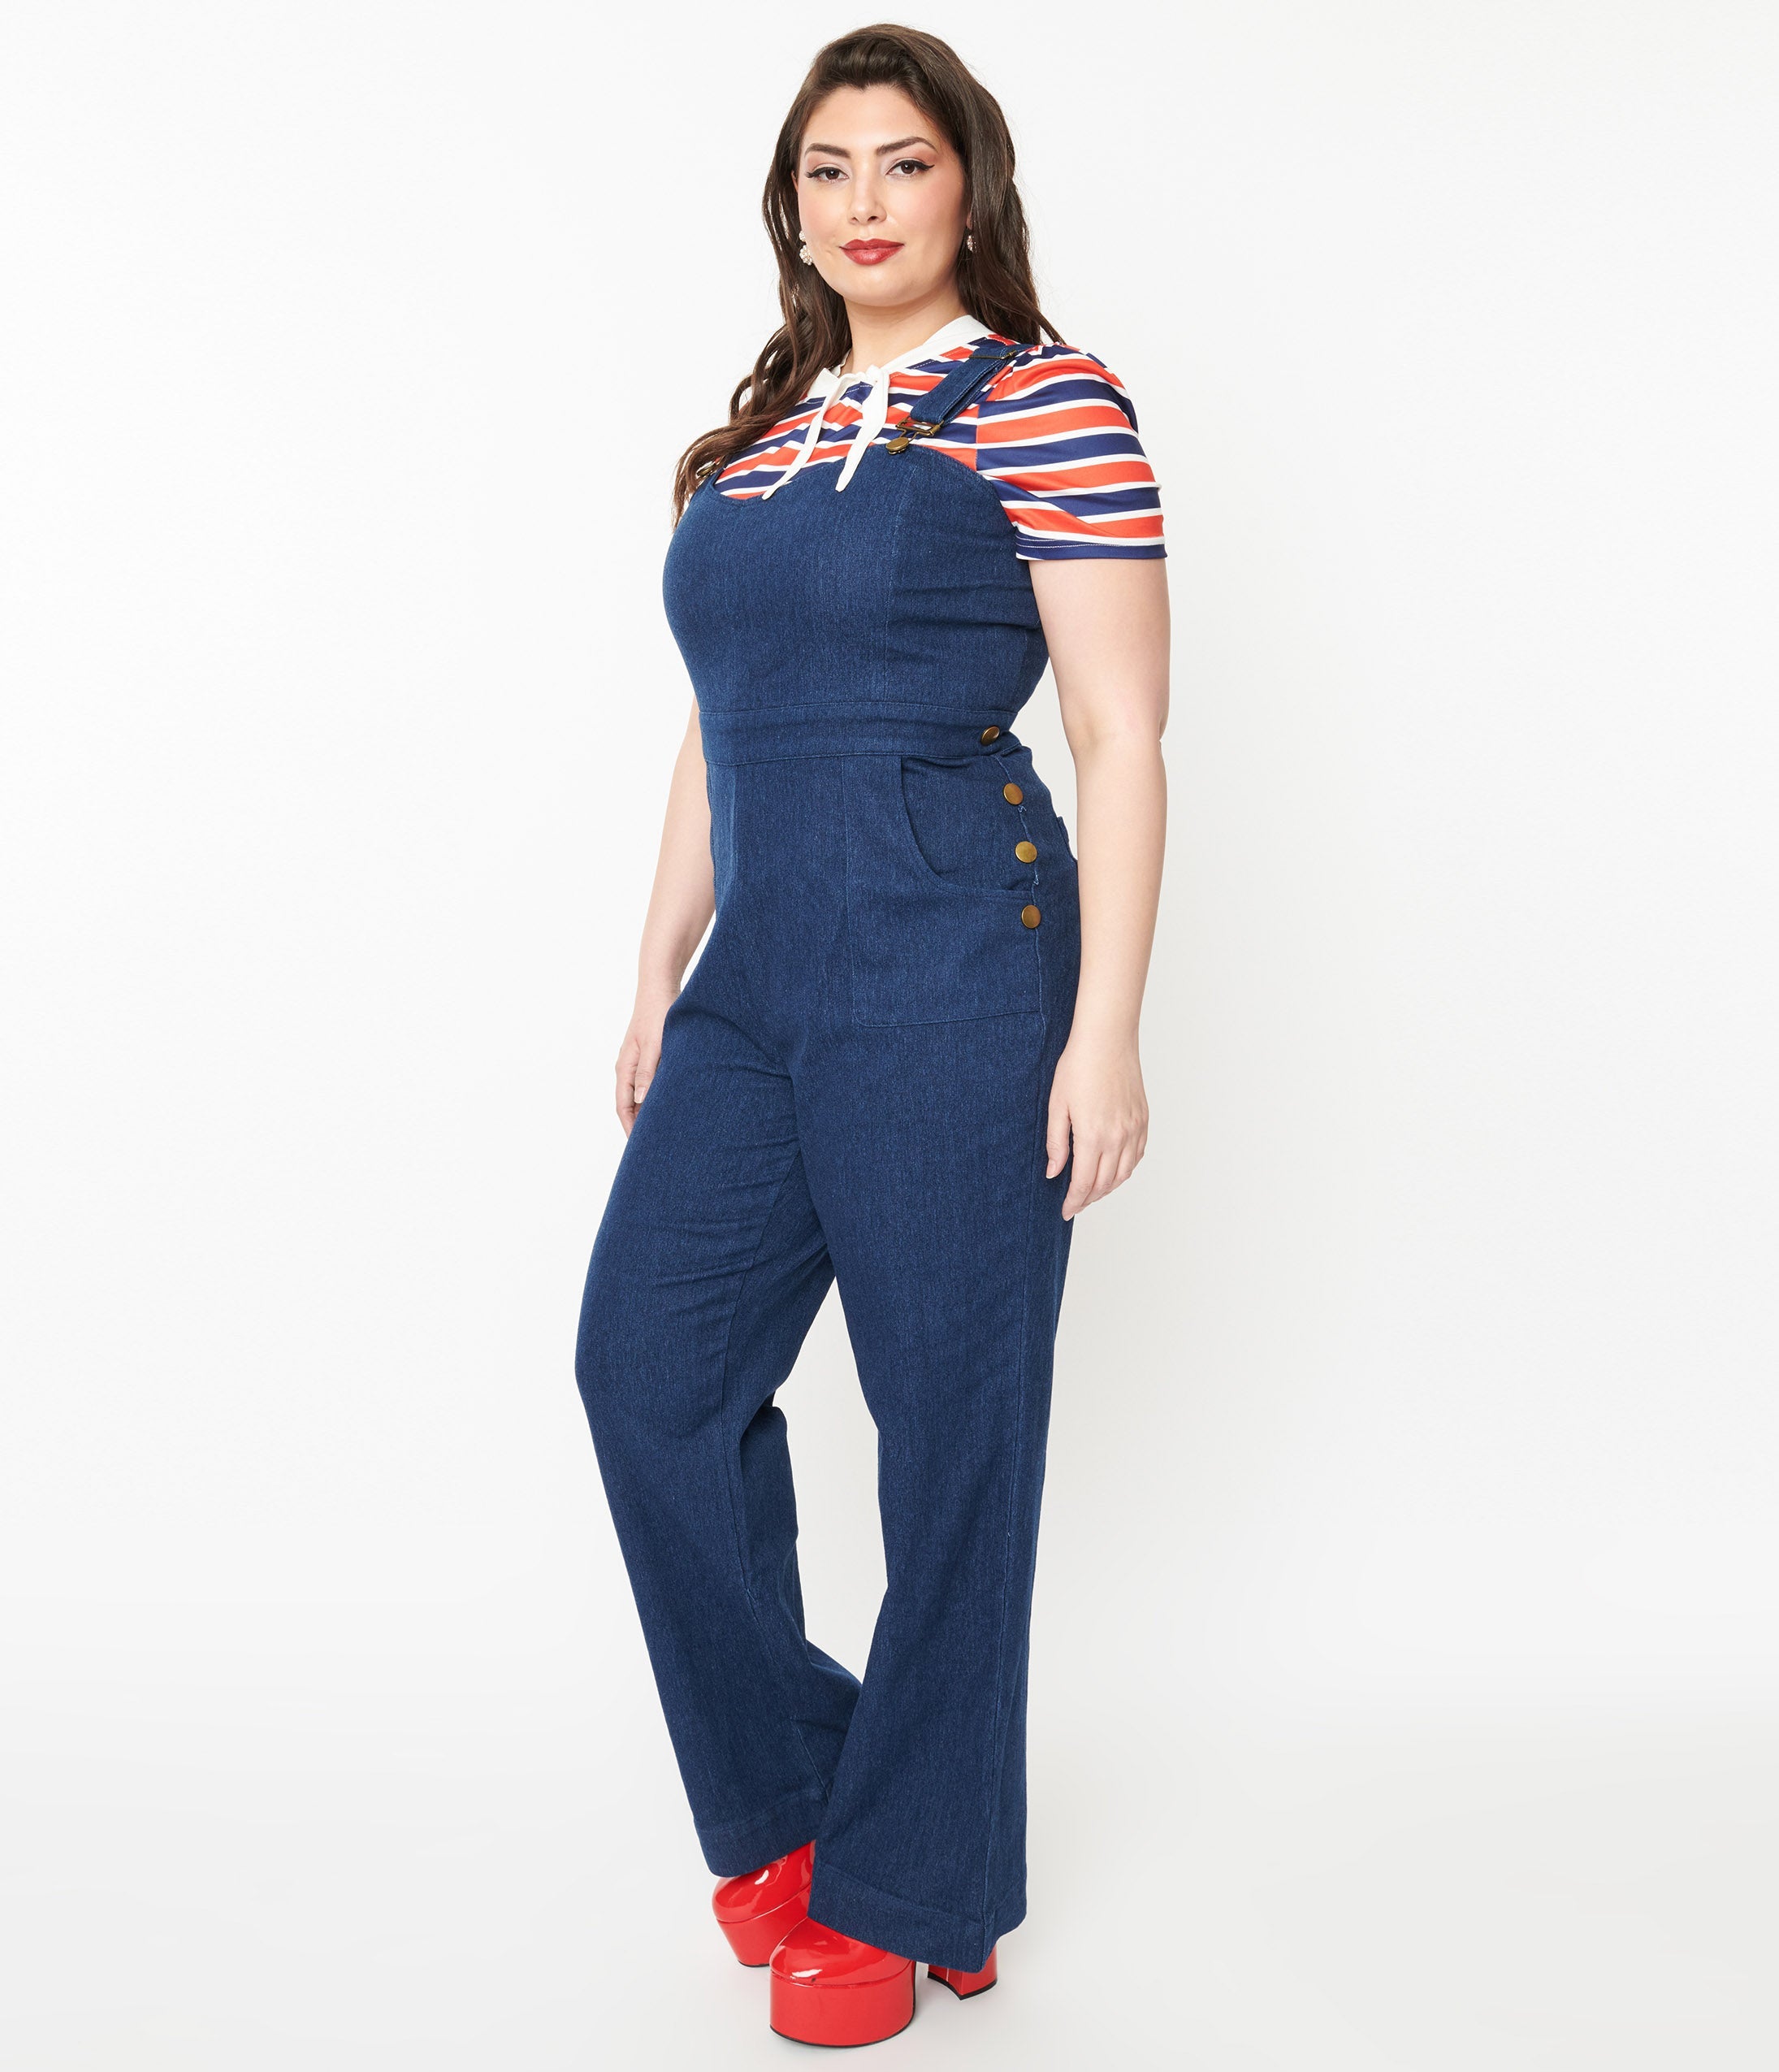 Plus Size Spring Jumpsuits | Chic Lover - Plus Size Clothing